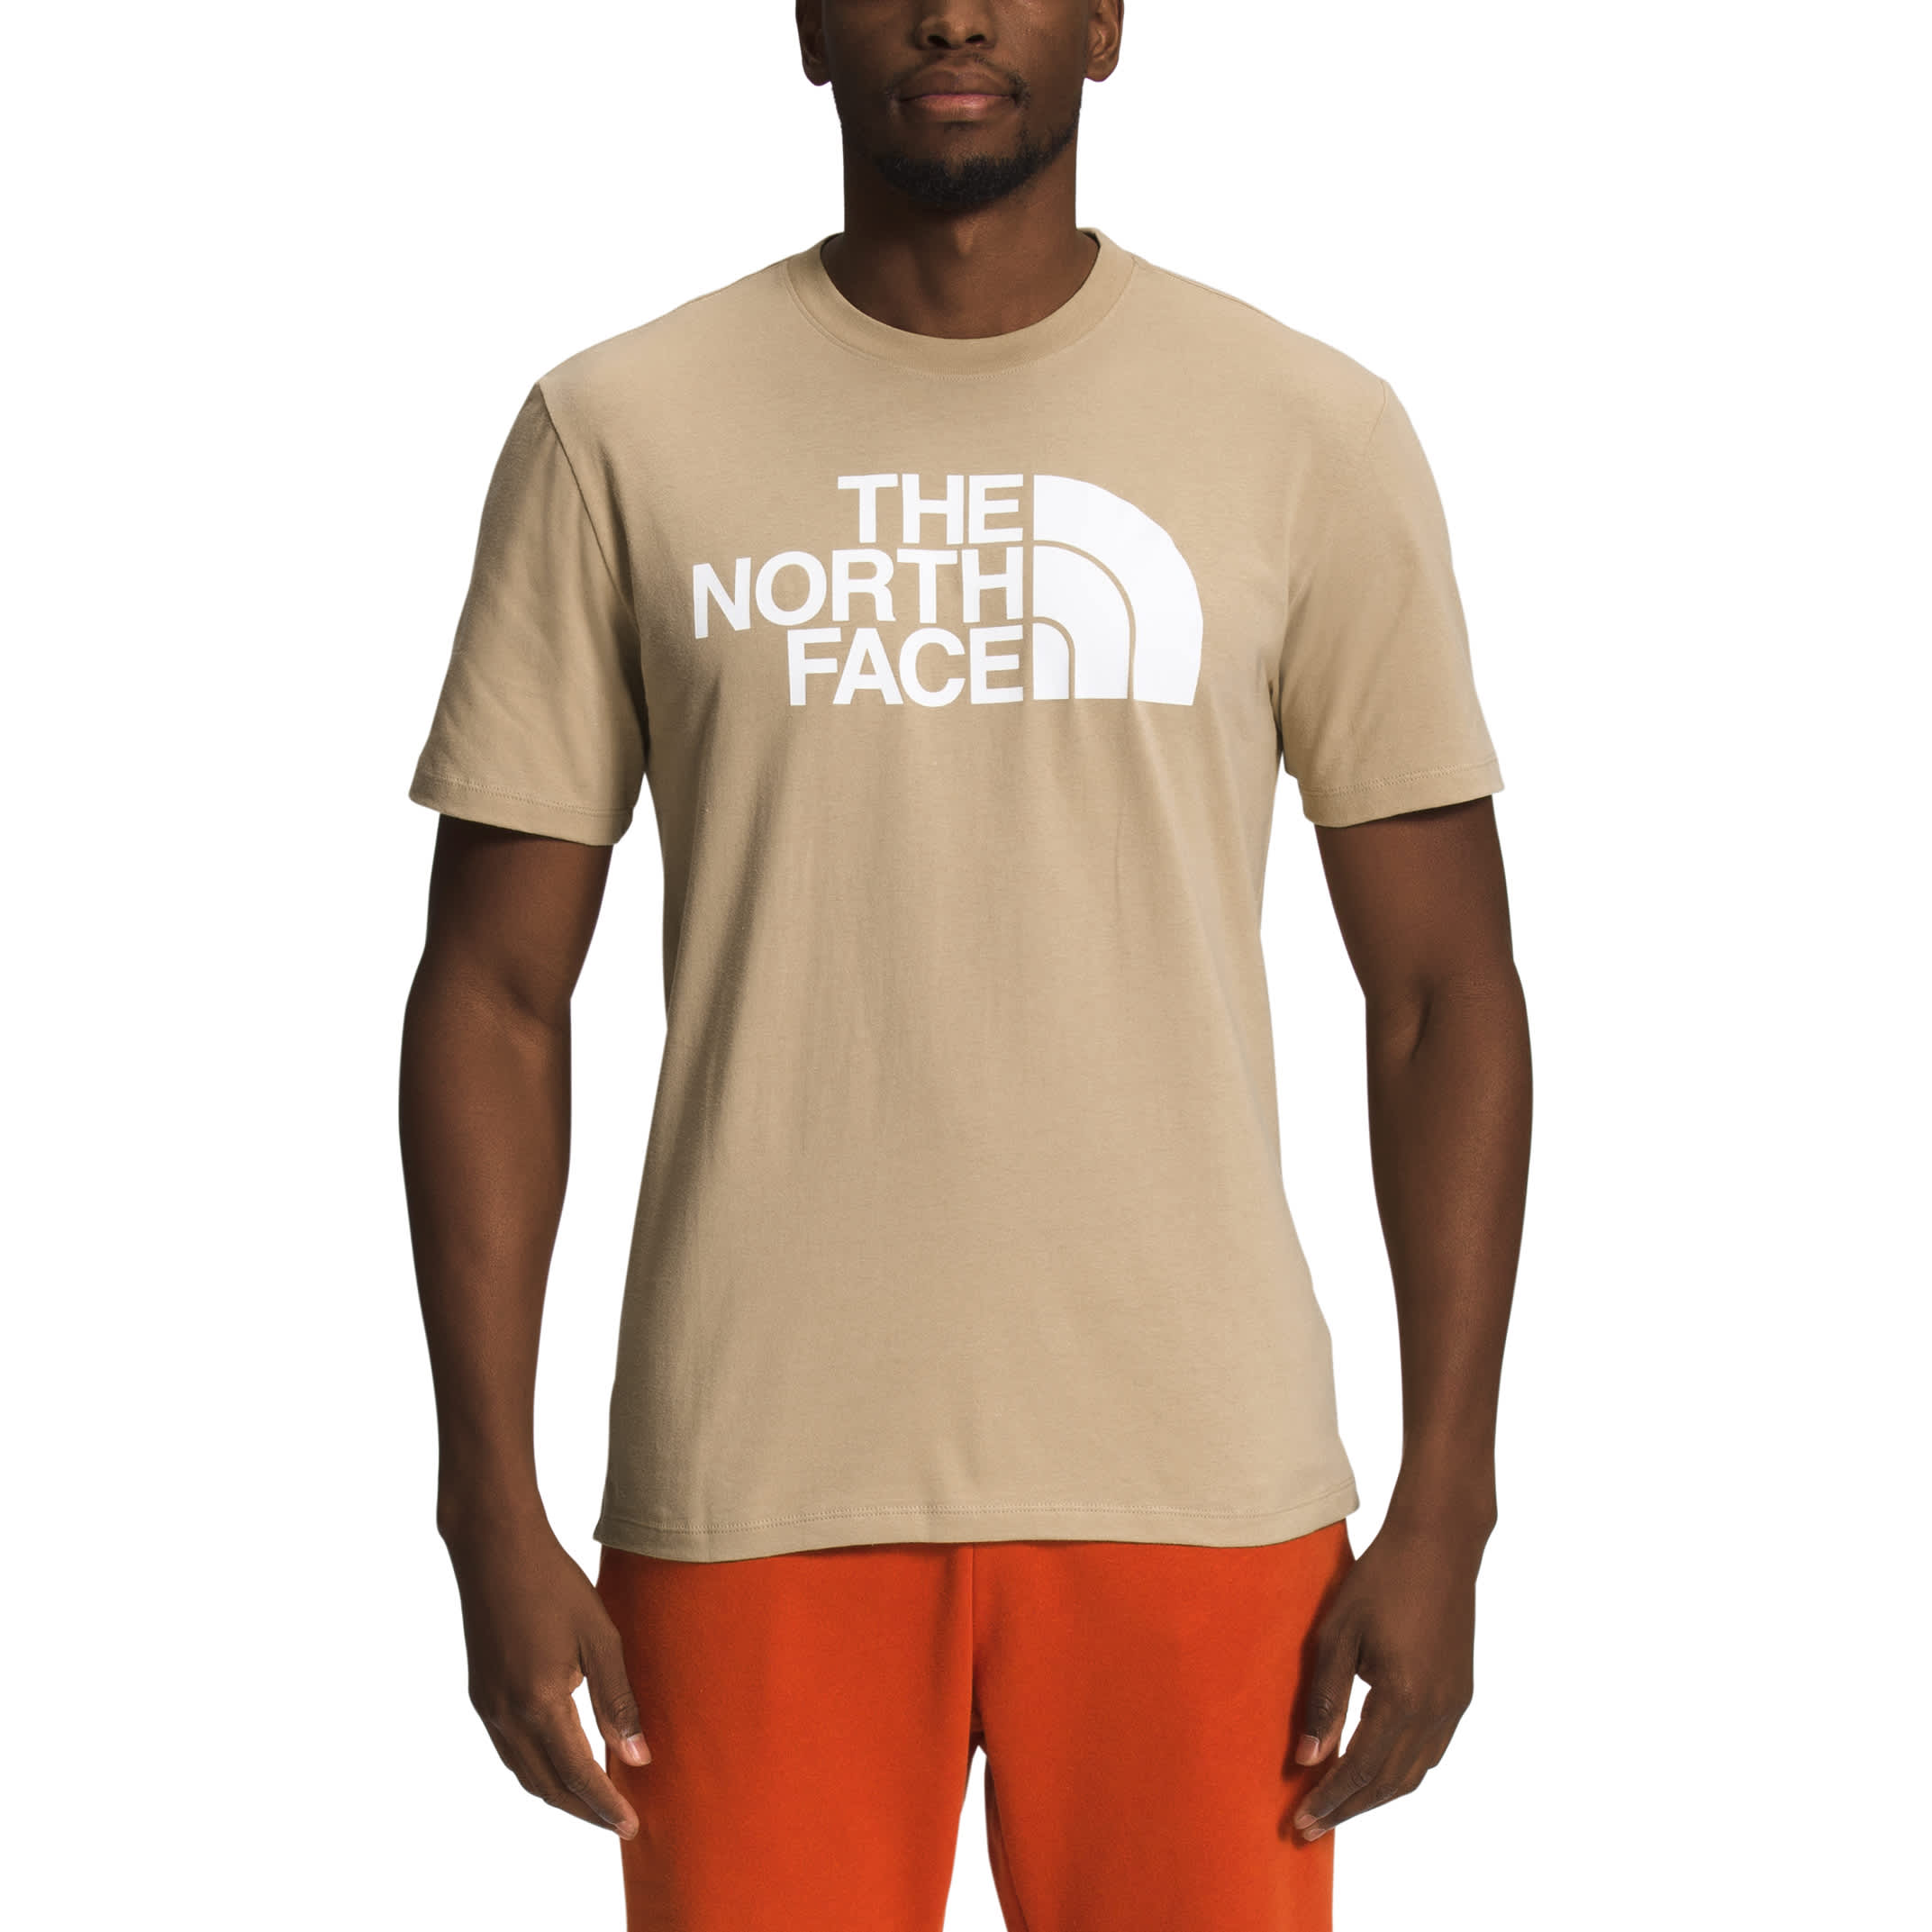 The North Face® Men’s Half Dome Short-Sleeve T-Shirt